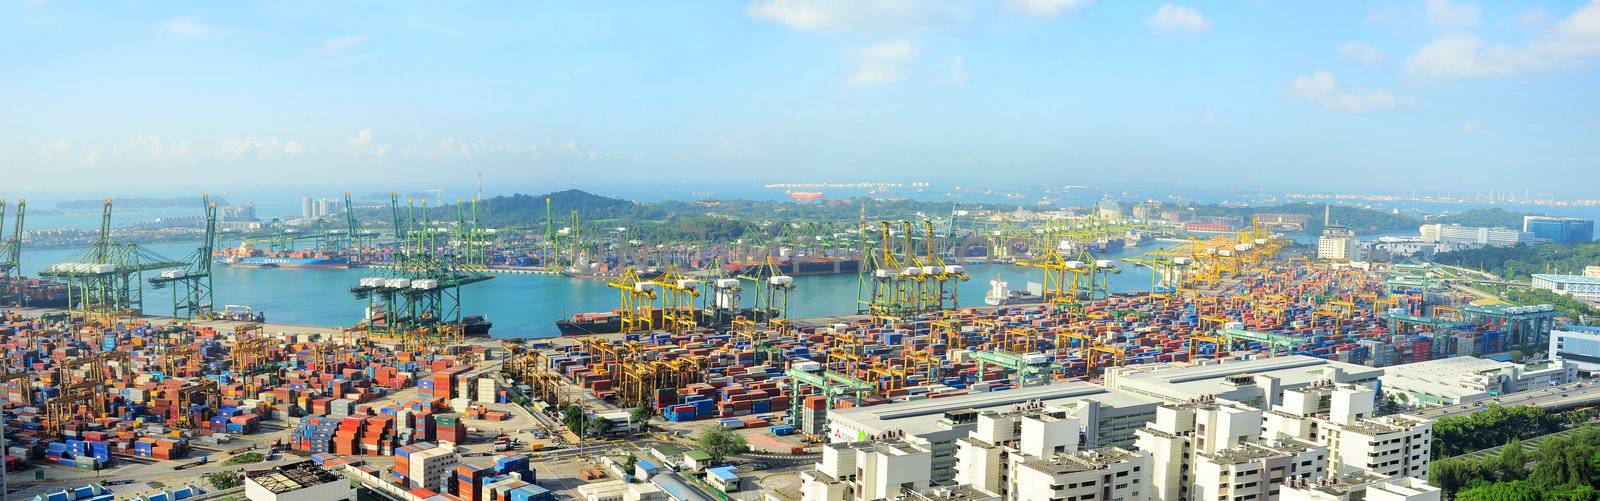 Singapore, Republic of Singapore - March 07, 2013: Singapore industrial port. It is the world's busiest port in terms of total shipping tonnage, it tranships a fifth of the world's shipping containers.